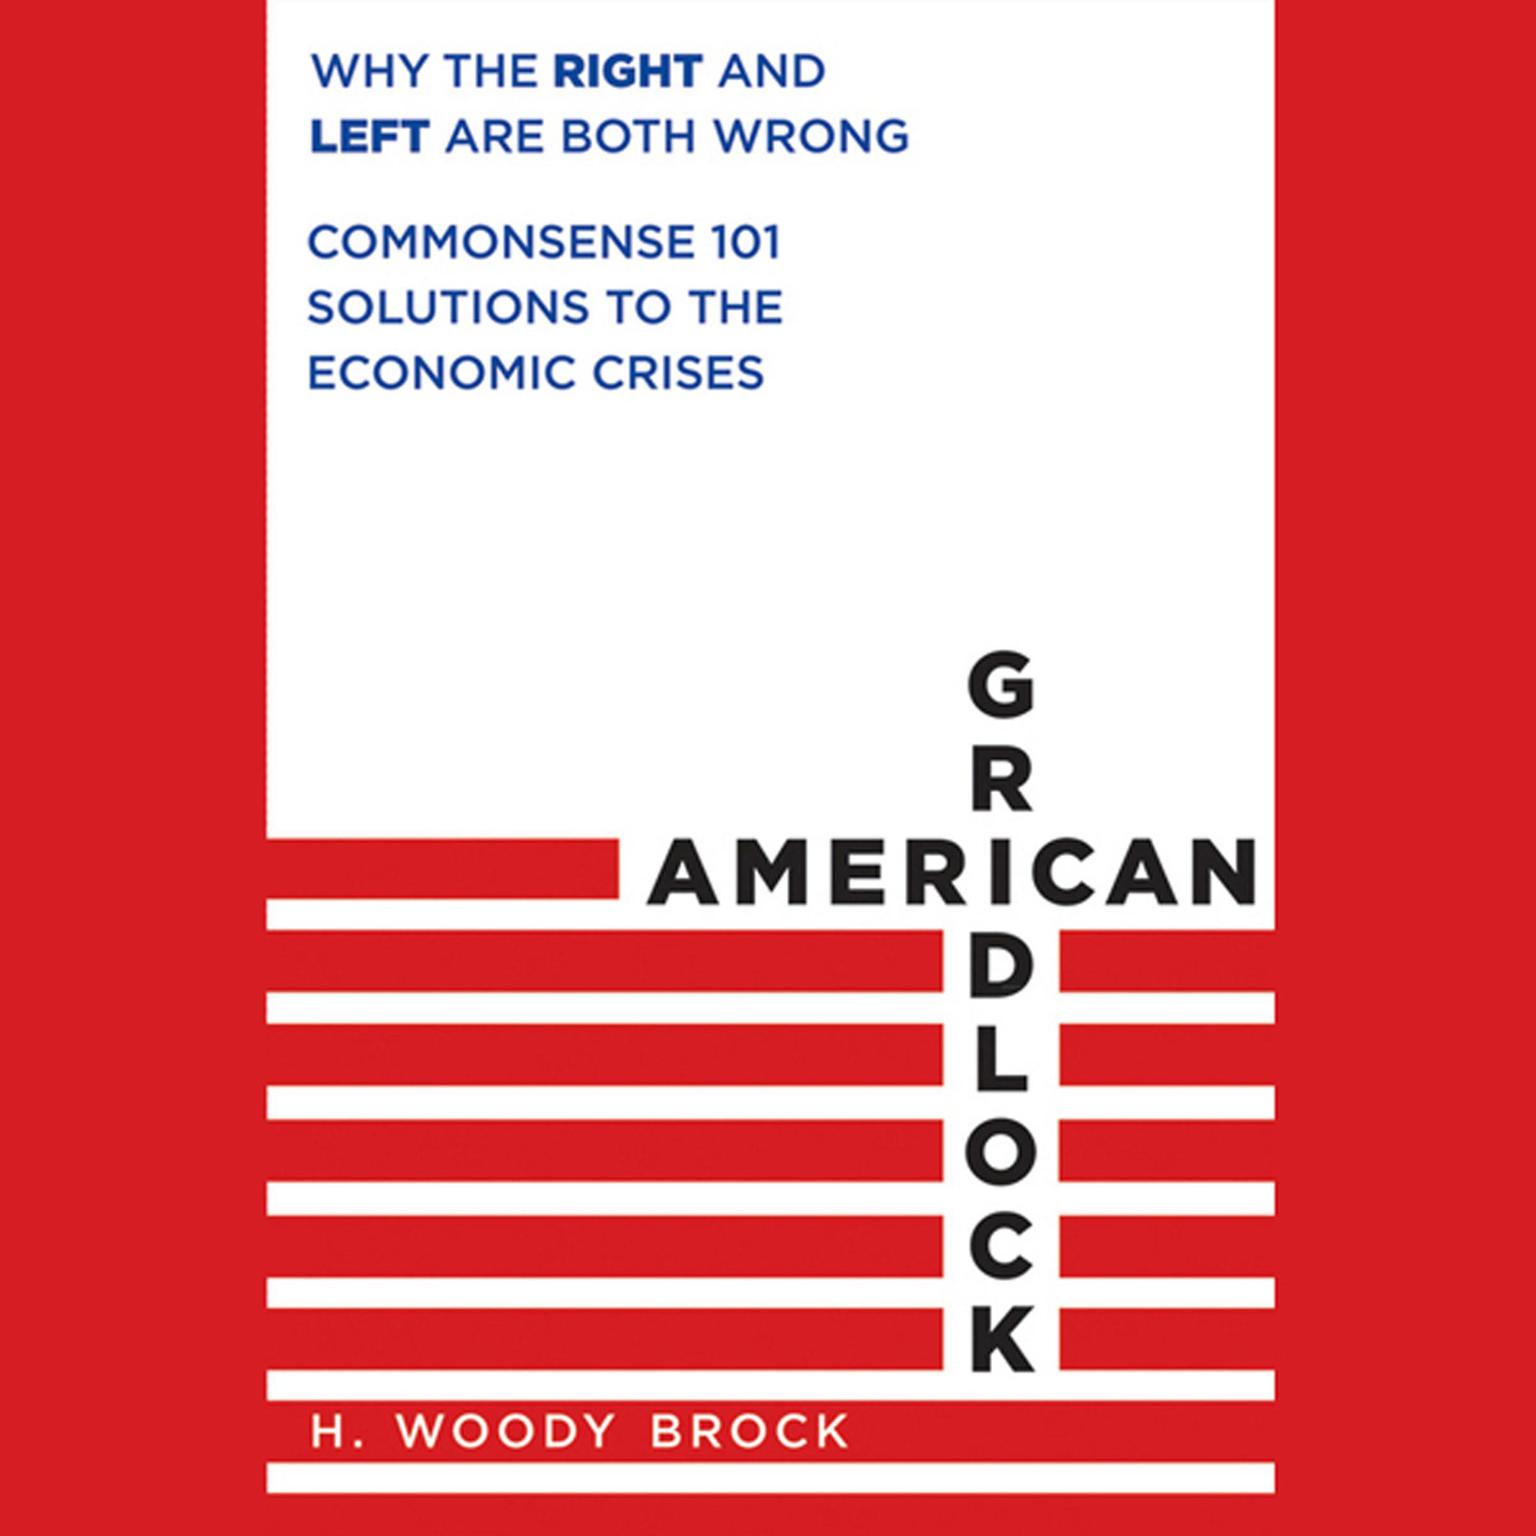 American Gridlock: Why the Right and Left Are Both Wrong - Commonsense 101 Solutions to the Economic Crises Audiobook, by H. Woody Brock